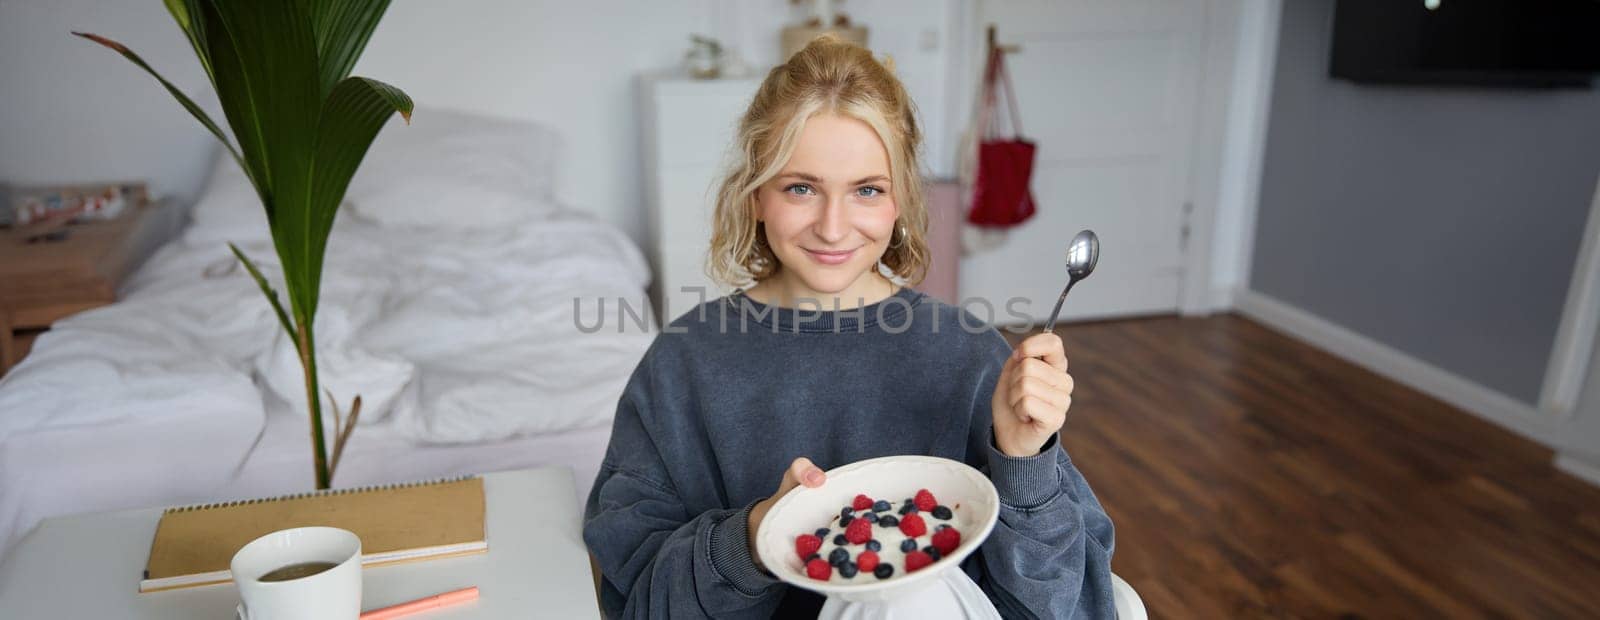 Portrait of young vlogger, content creator, showing her homemade breakfast on camera, eating dessert, smiling and looking happy.